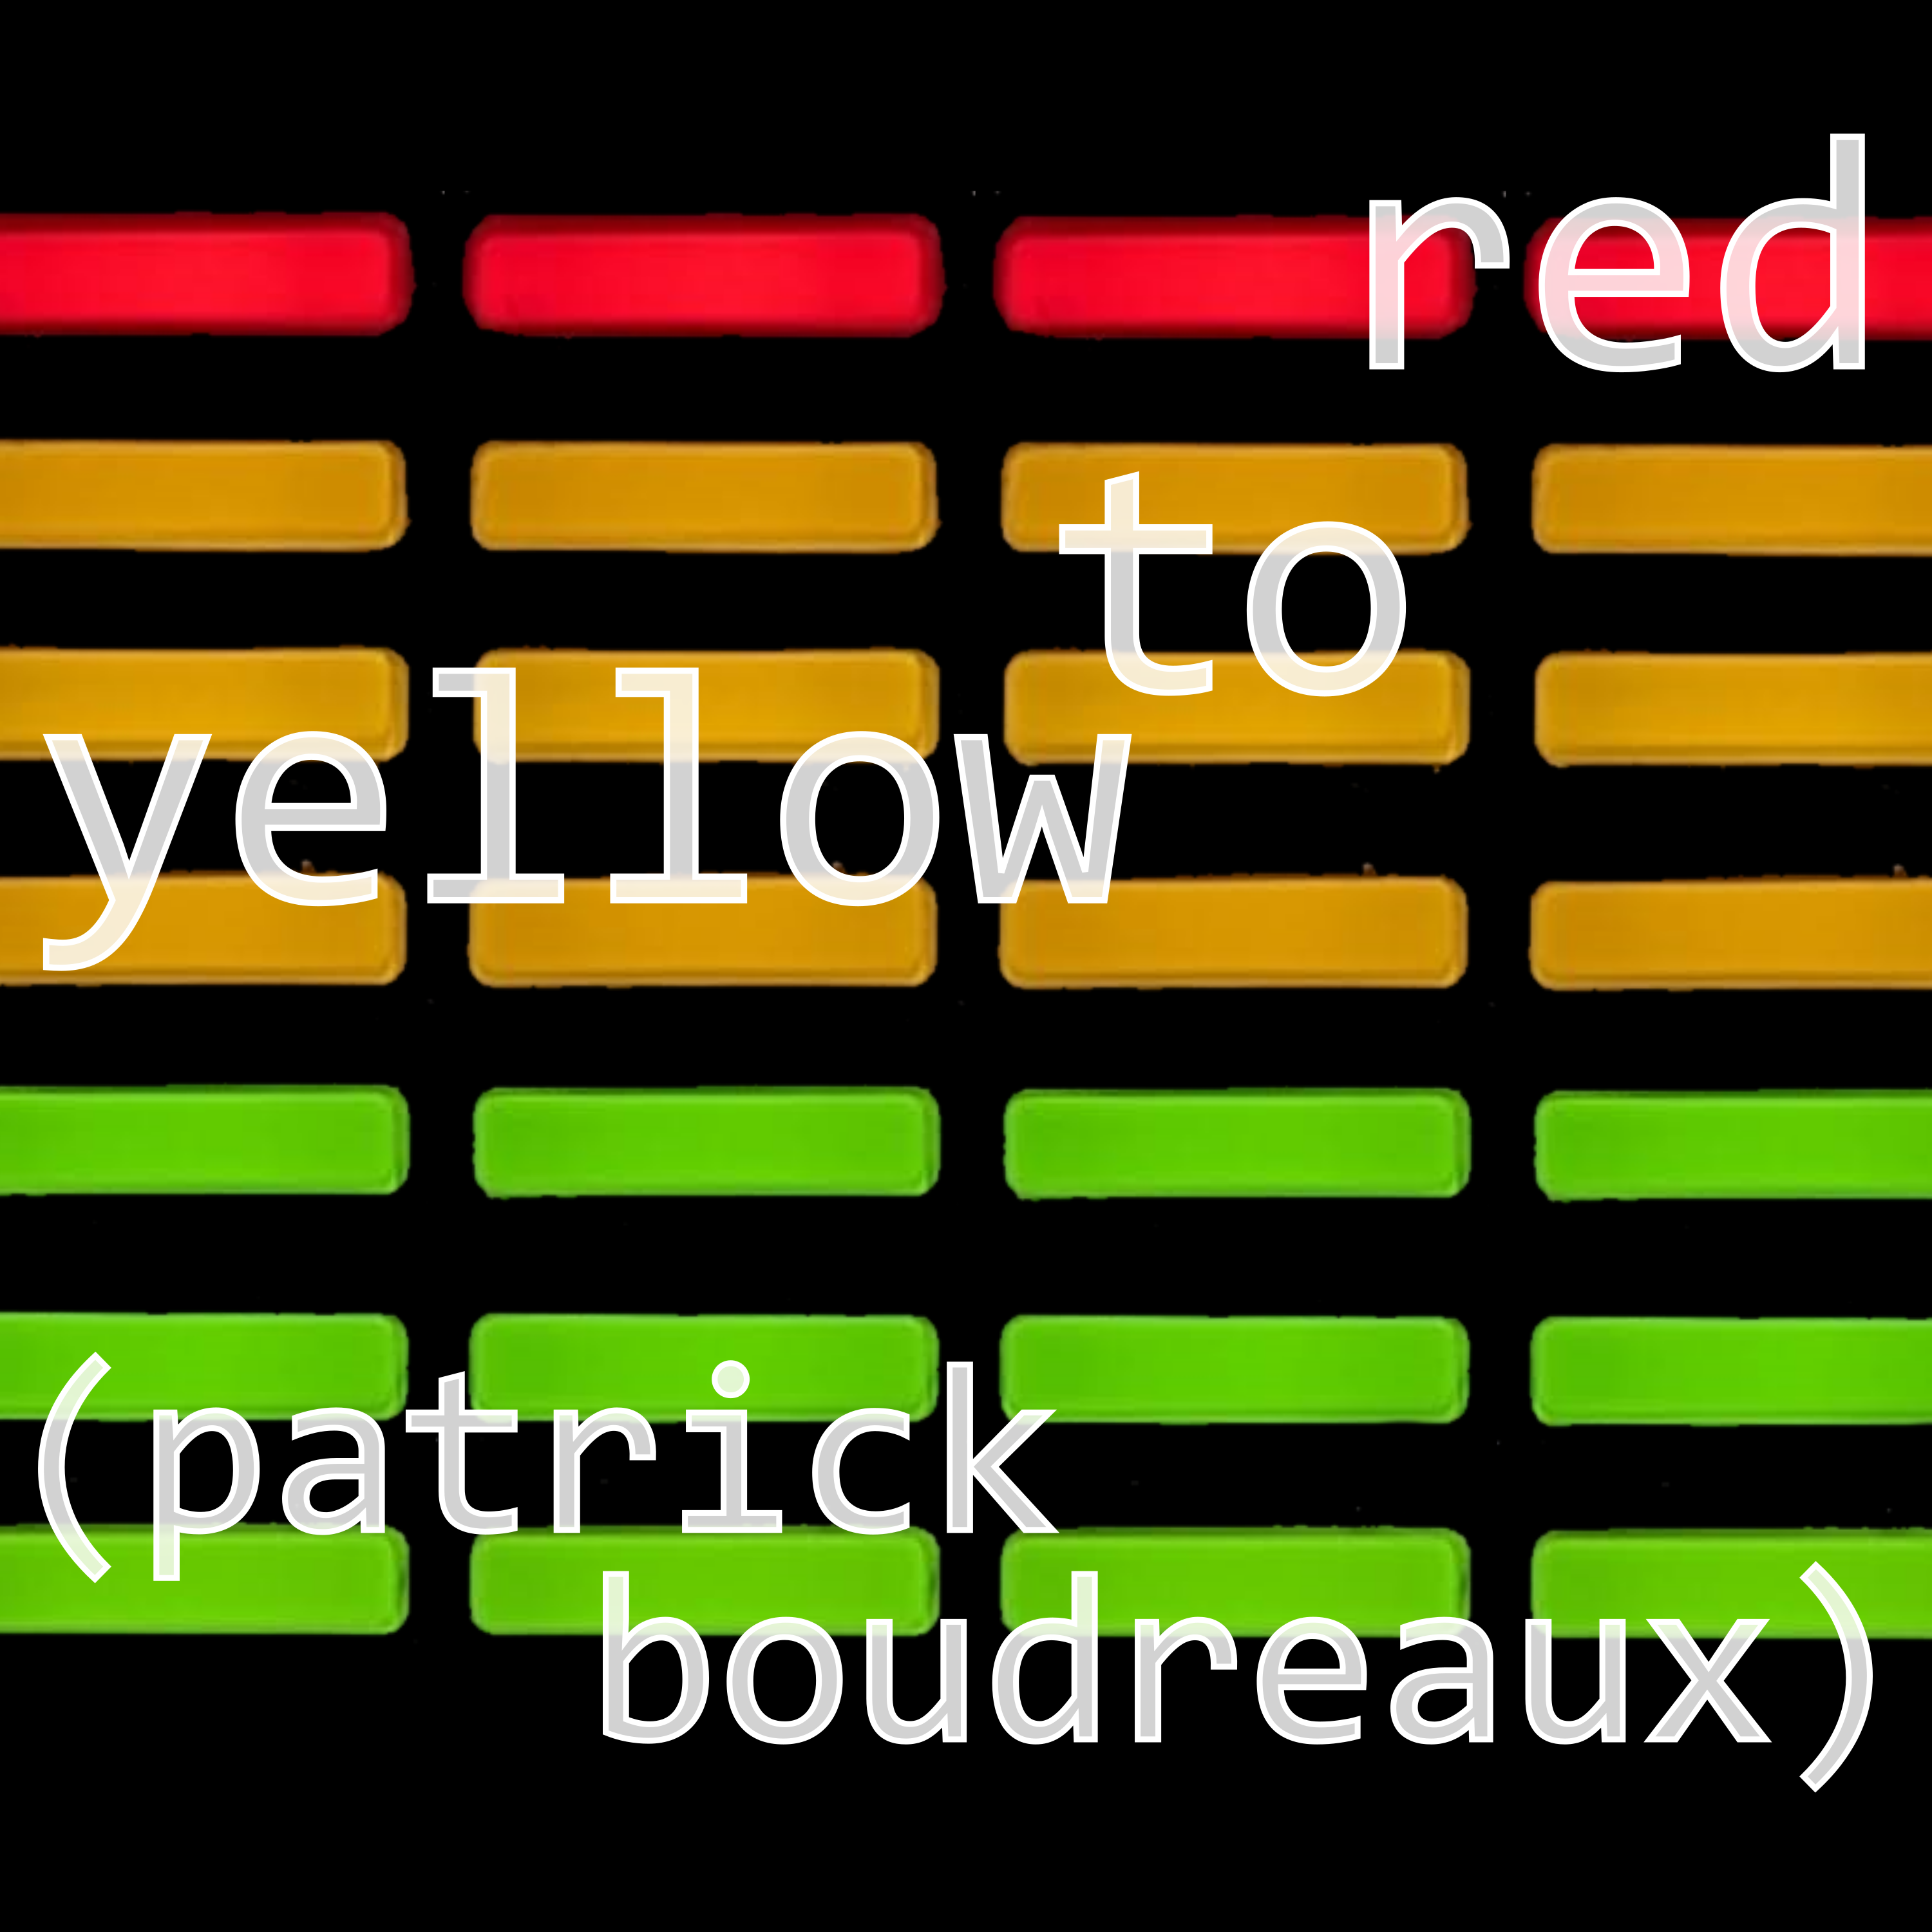 Yellow to red song cover art